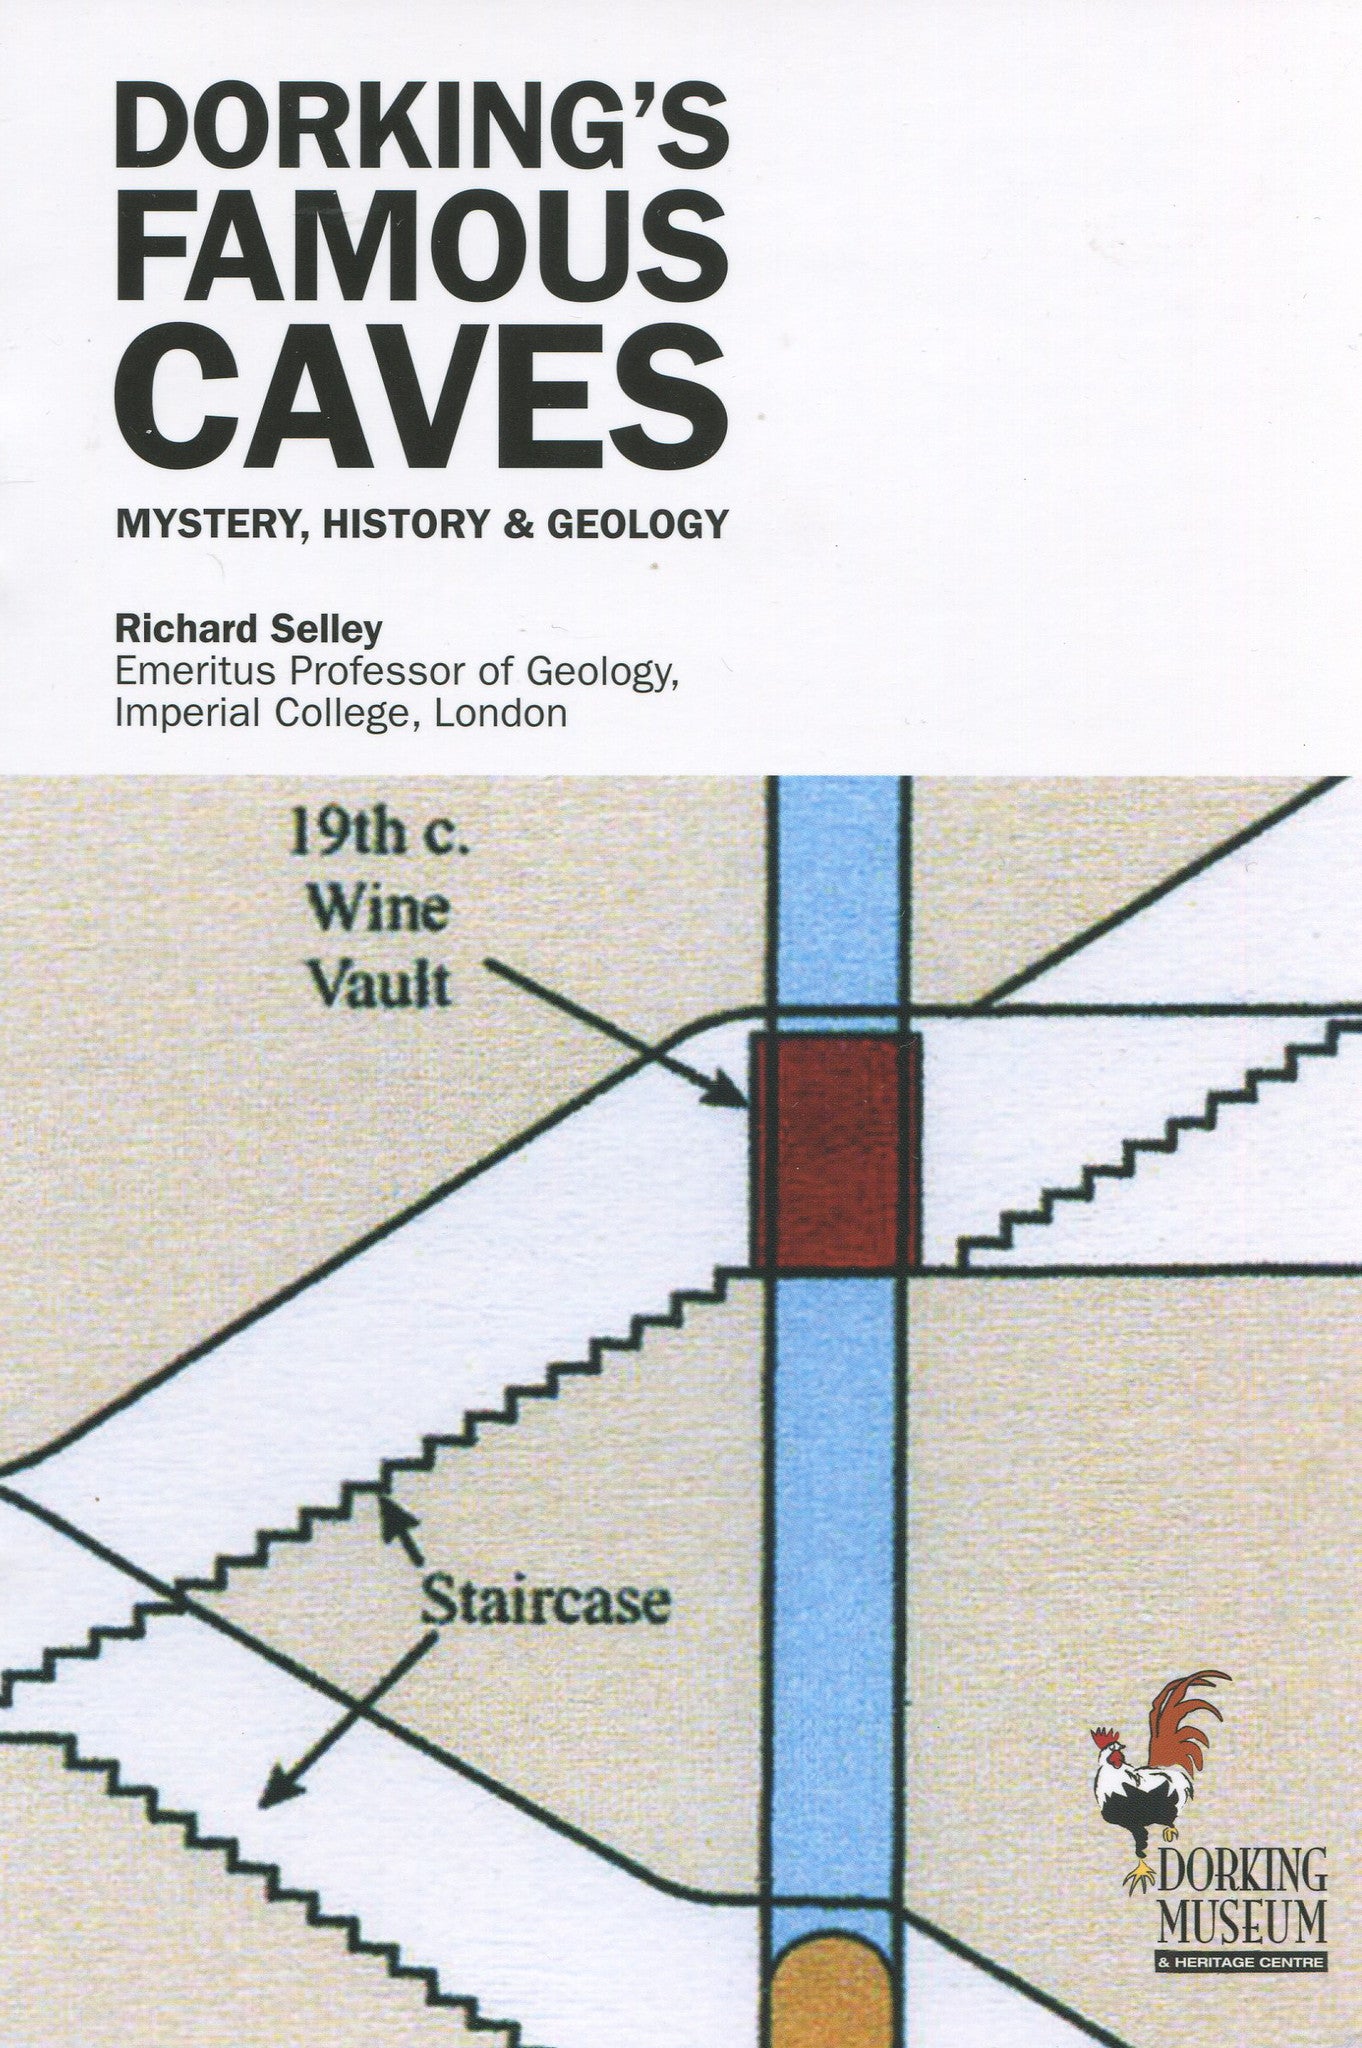 Dorking's Famous Caves by Professor Richard Selley